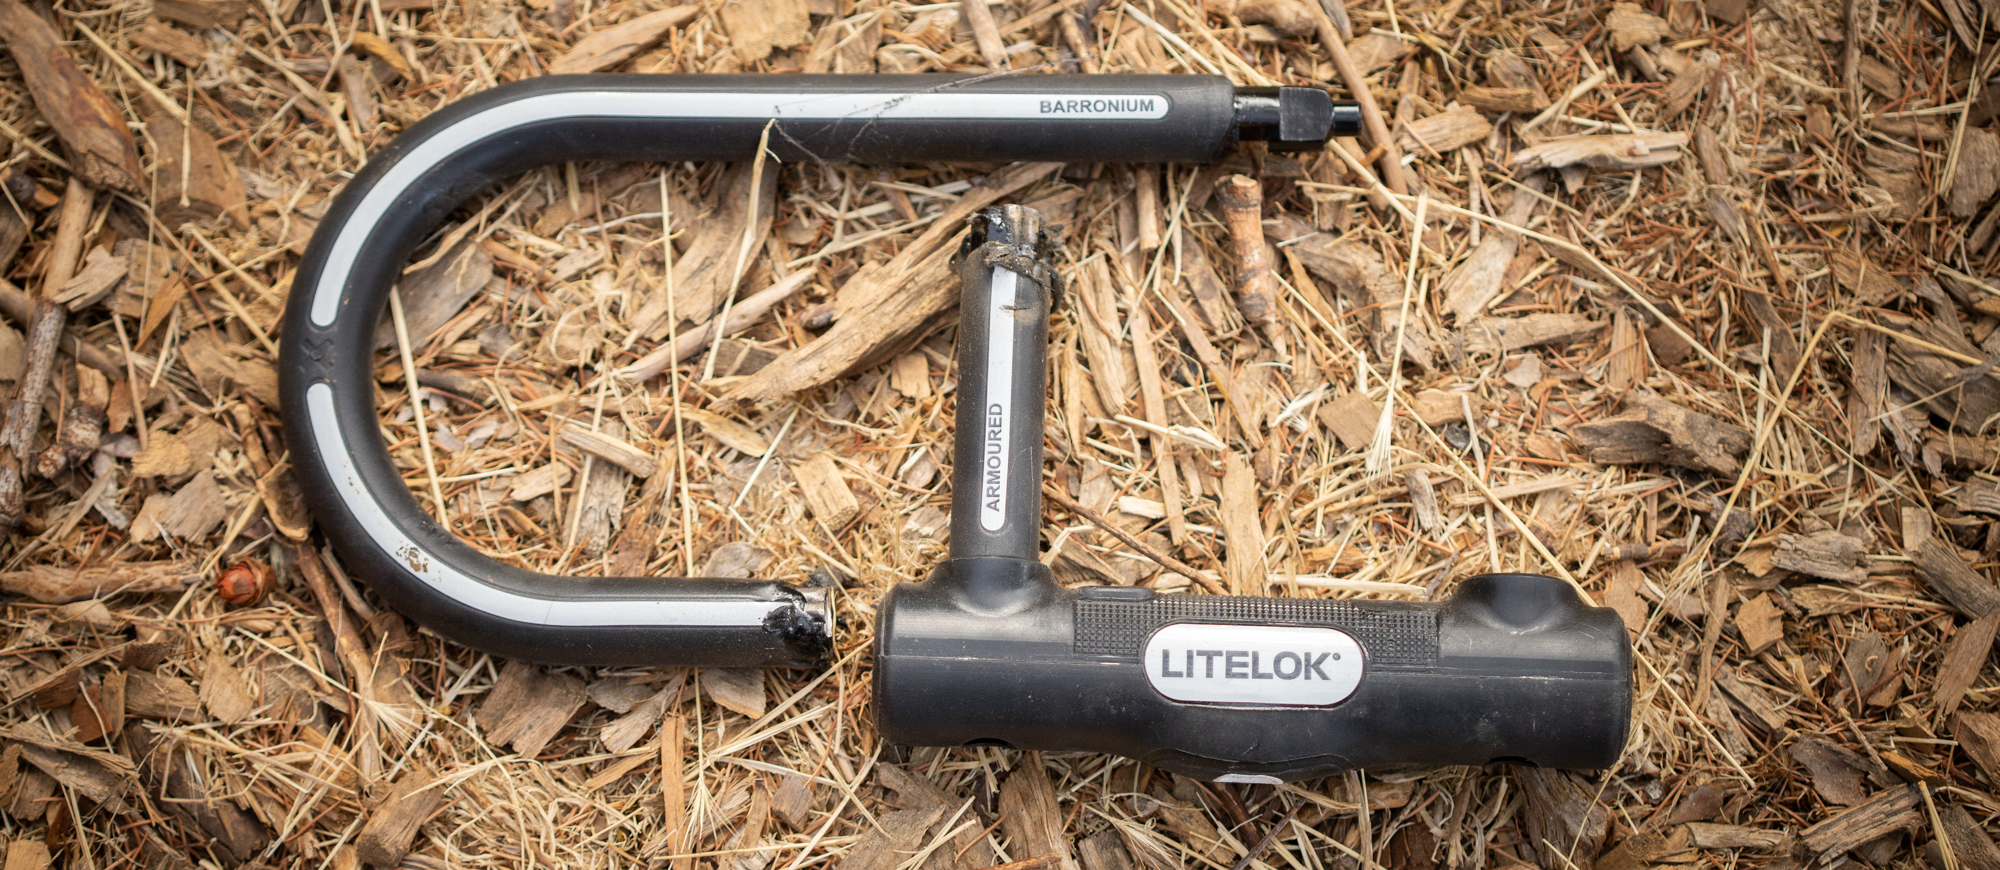 Finally, a Bike Lock That Can Stand Up to an Angle Grinder